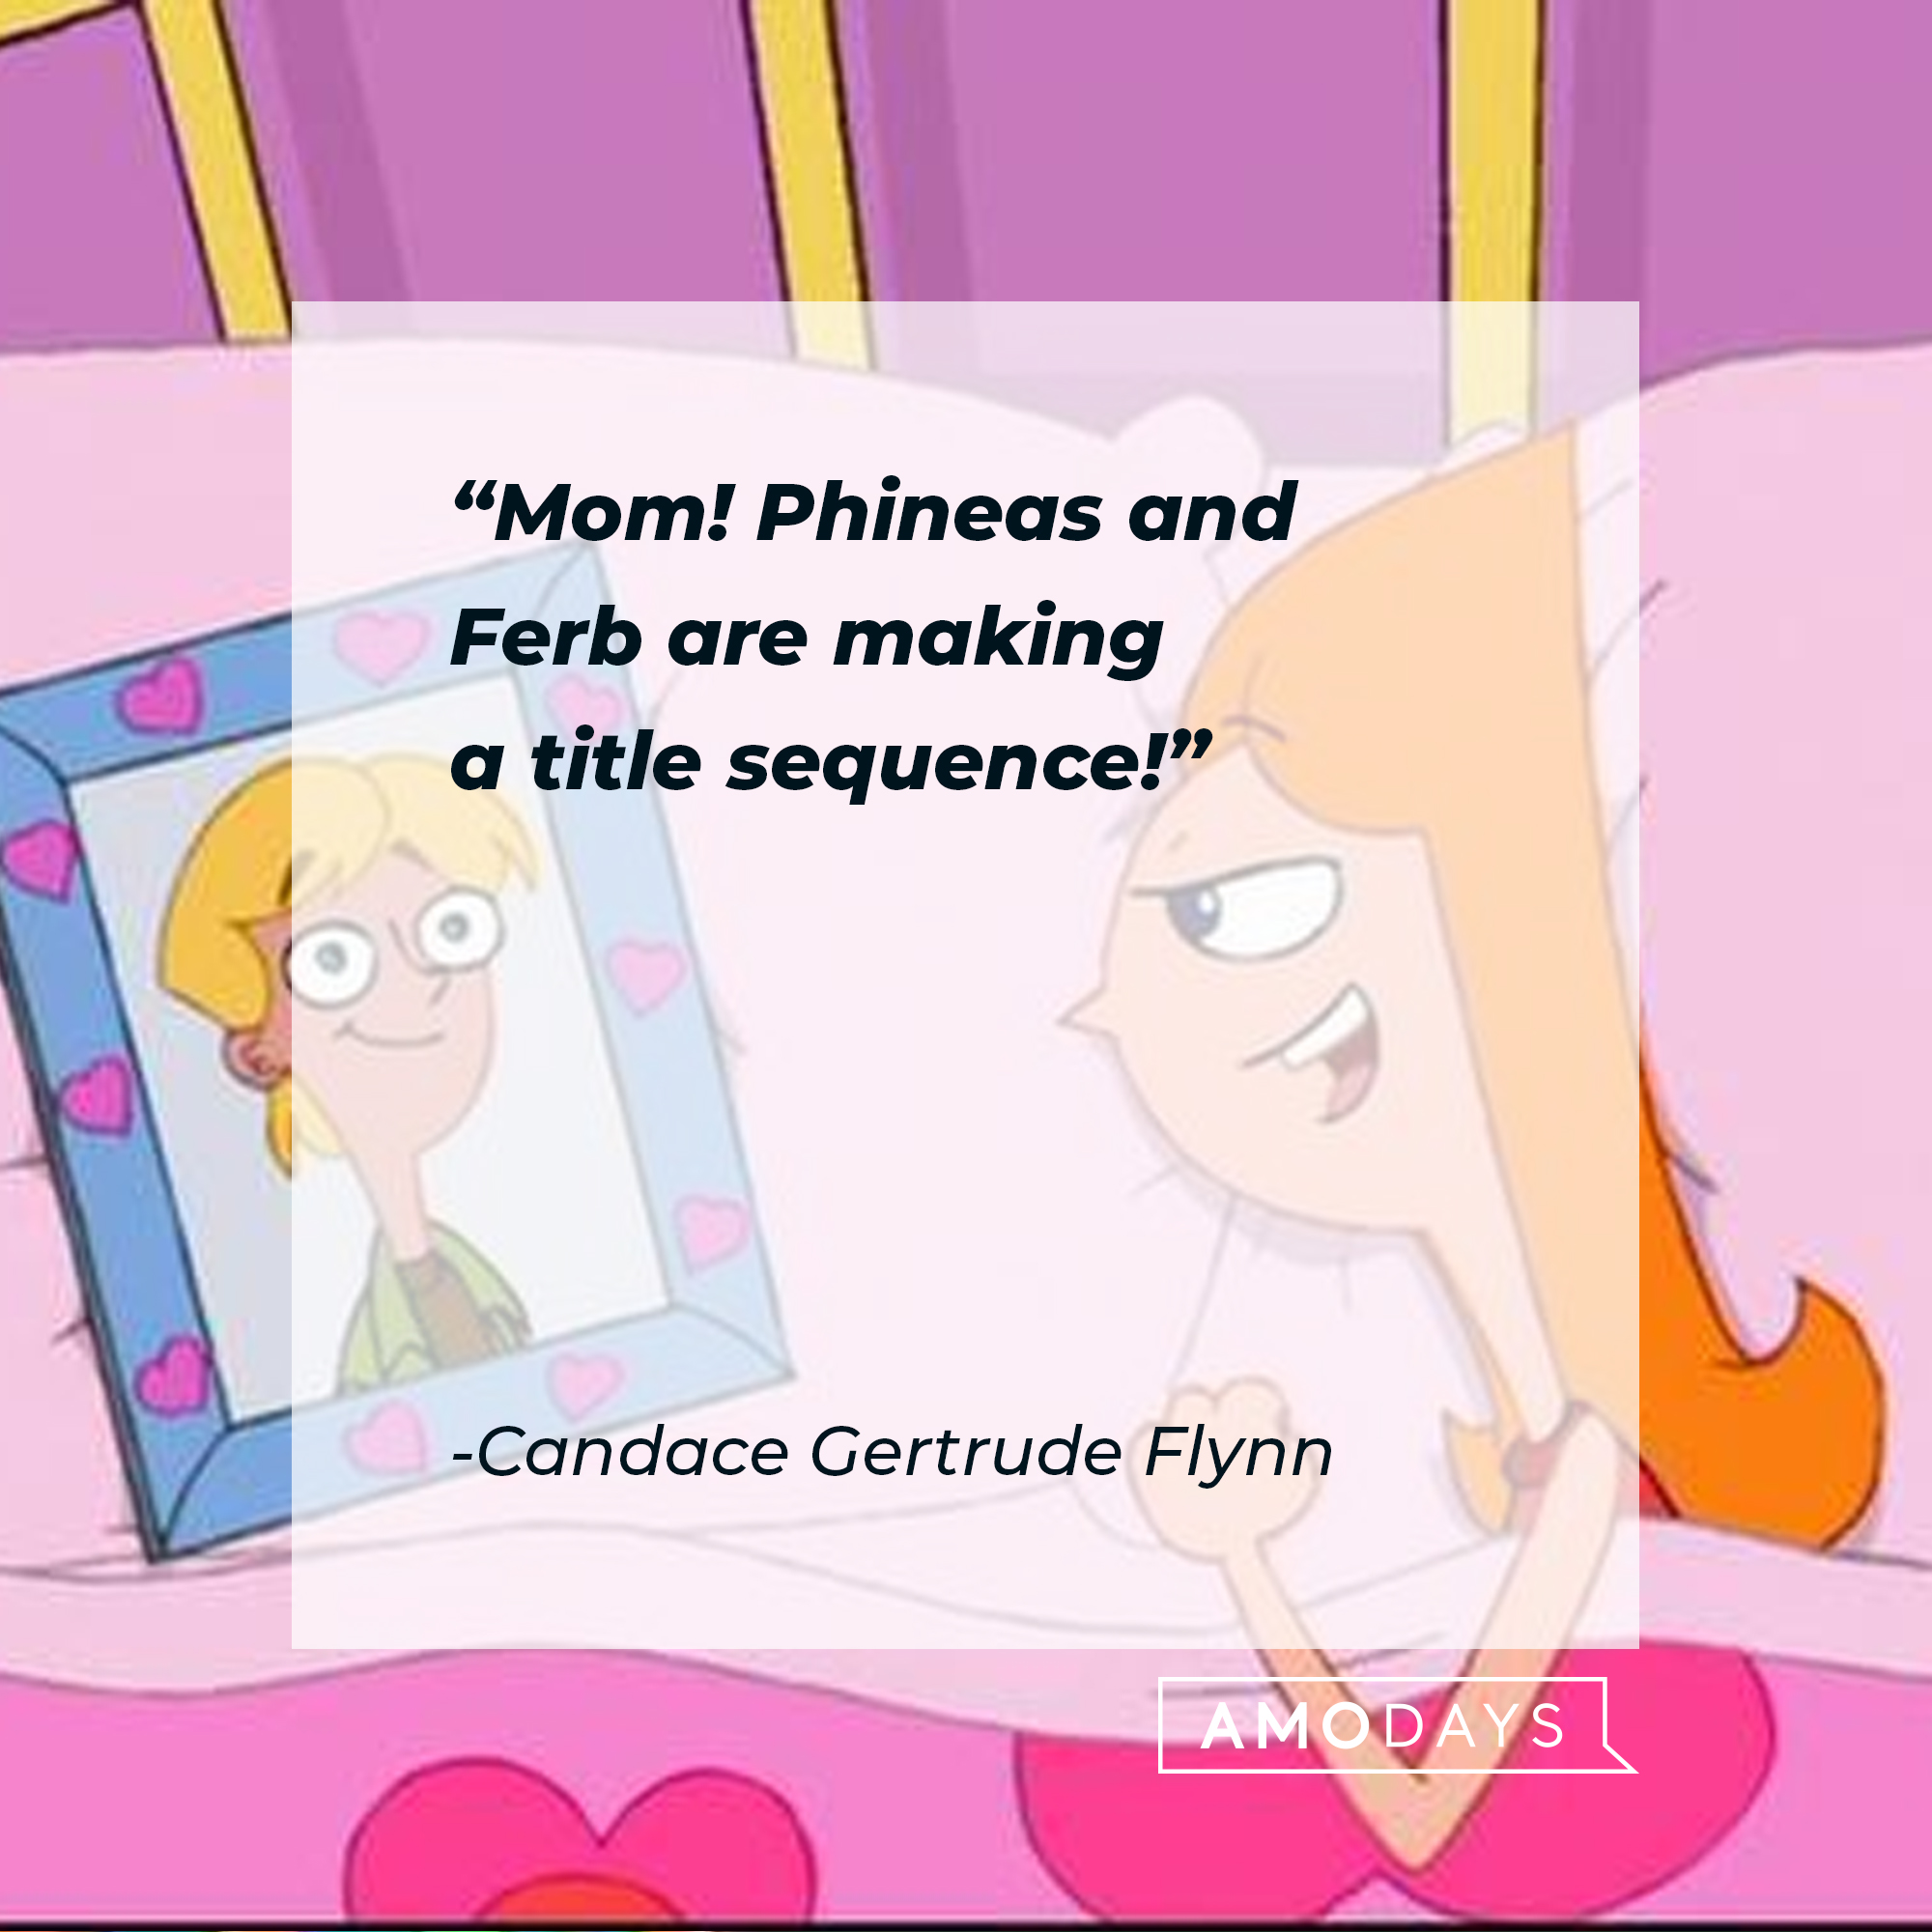 Candace Gertrude's quote: "Mom! Phineas and Ferb are making a title sequence!" | Source: facebook.com/Phineas-and-Ferb